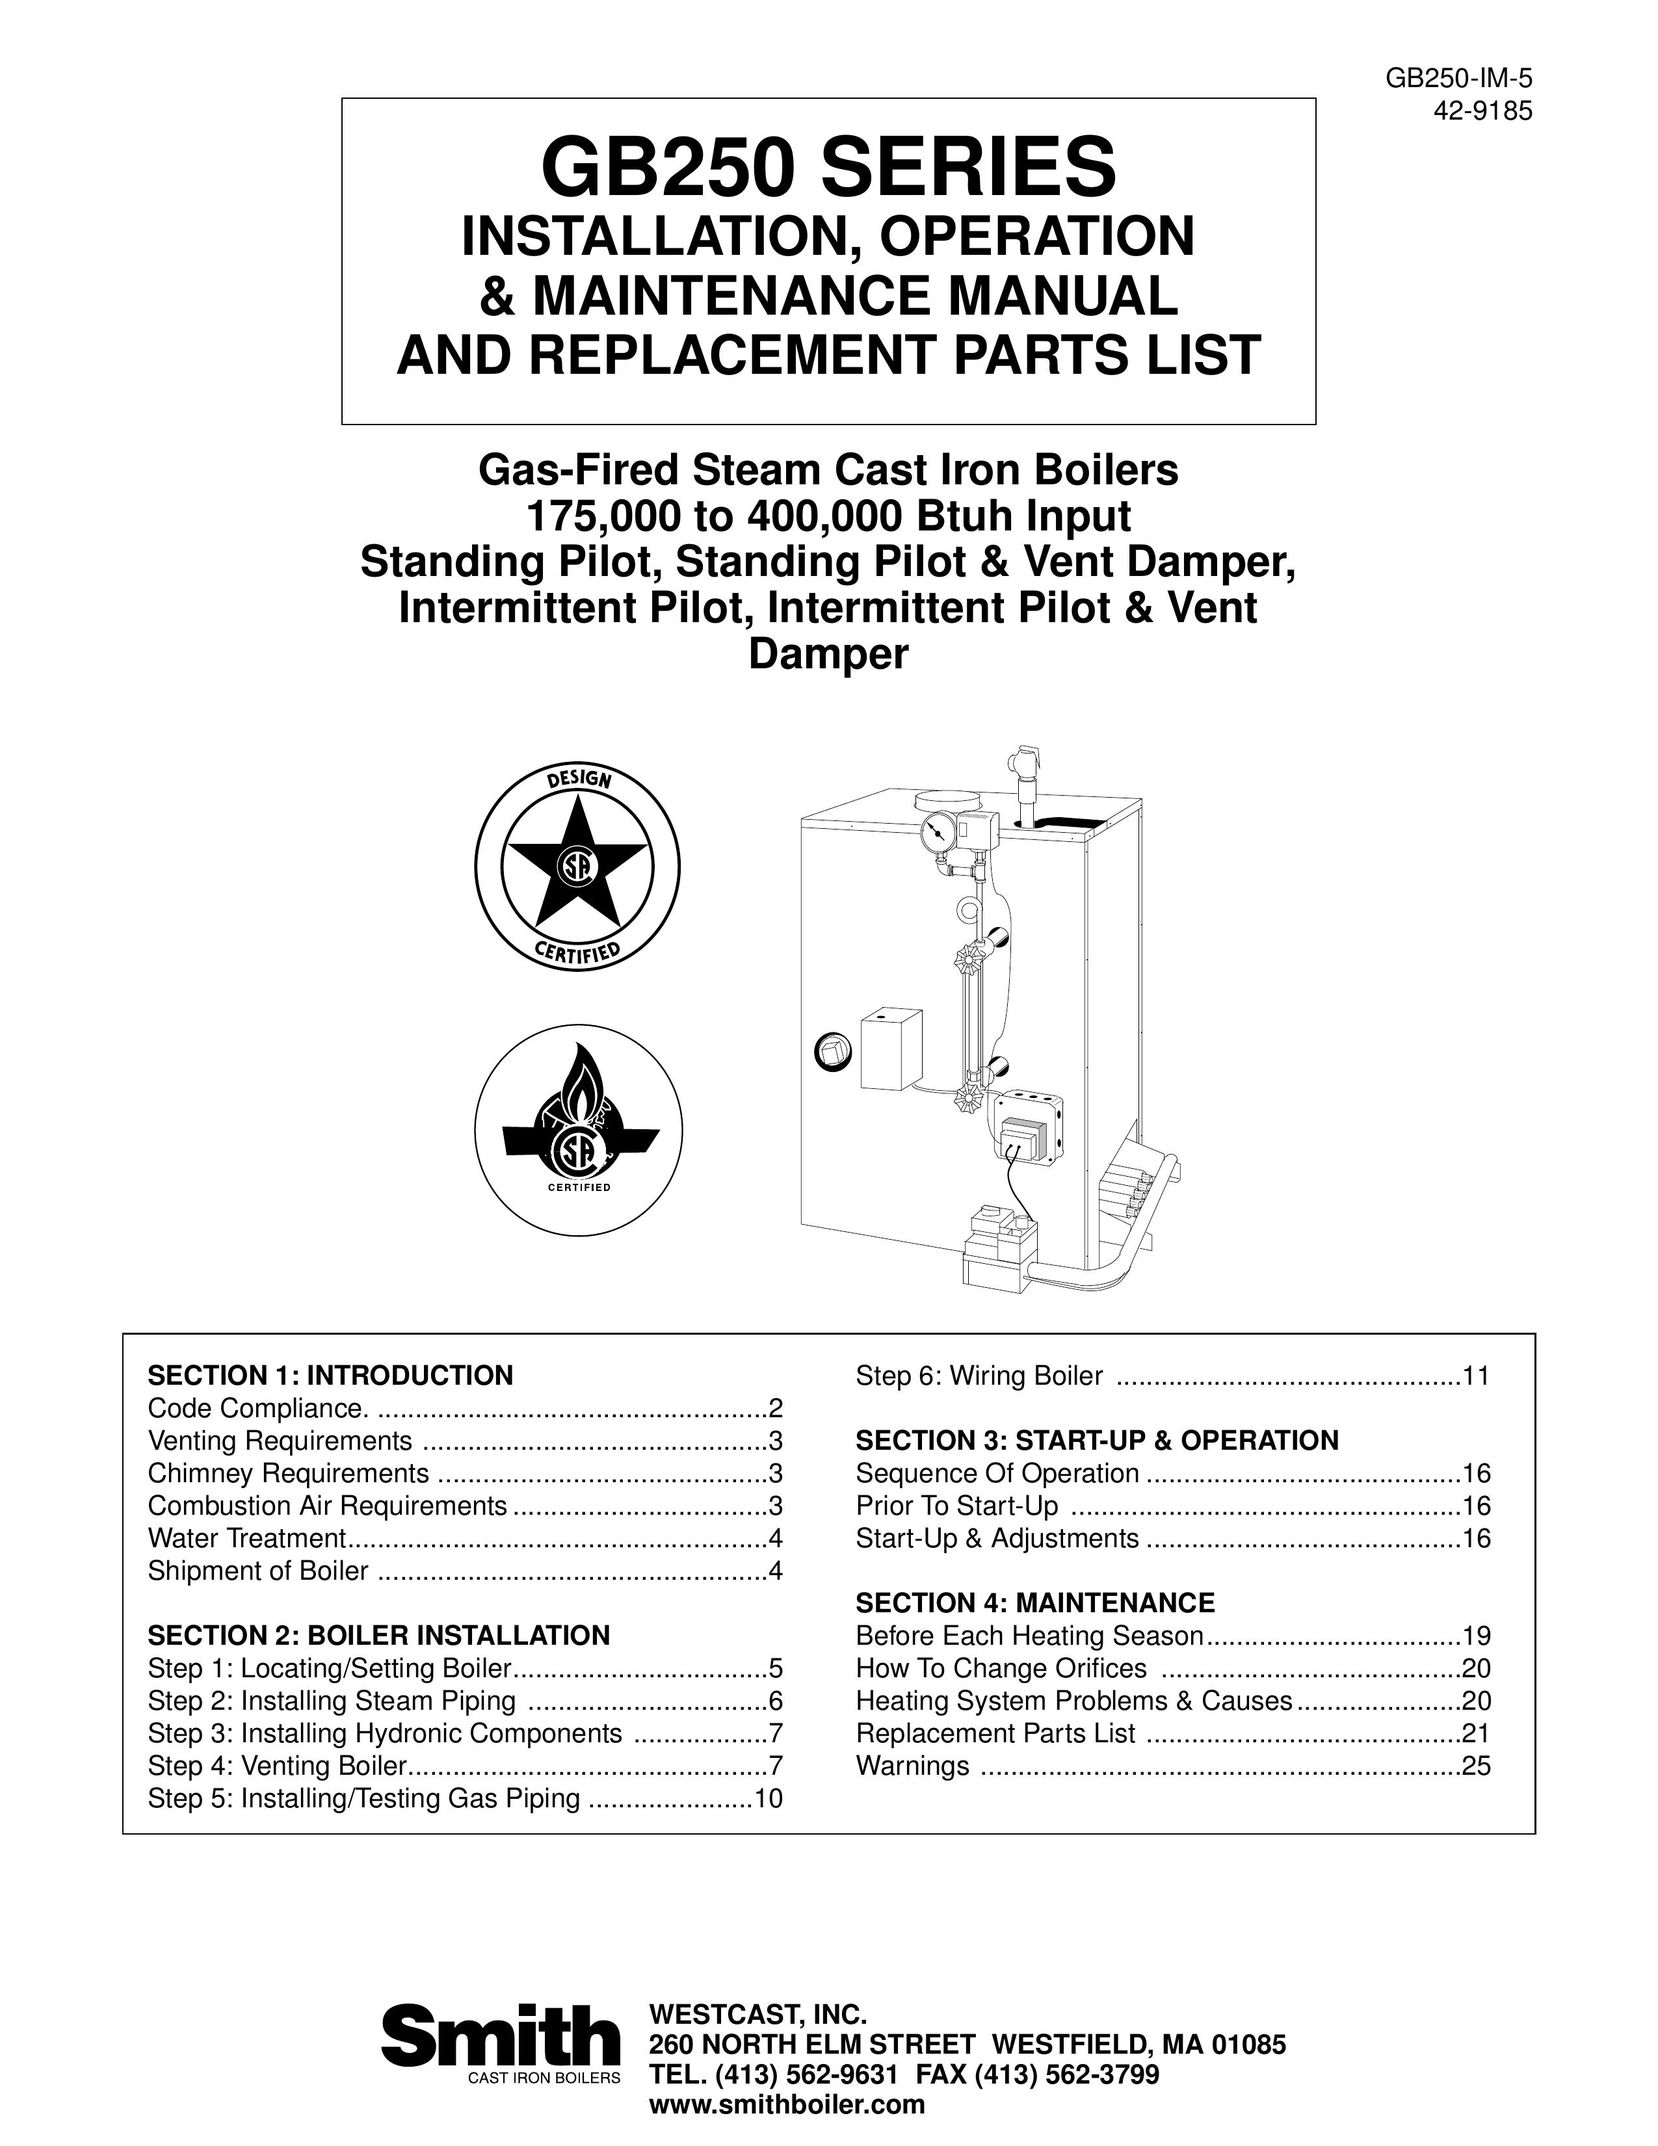 Smith Cast Iron Boilers GB250 SERIES Boiler User Manual